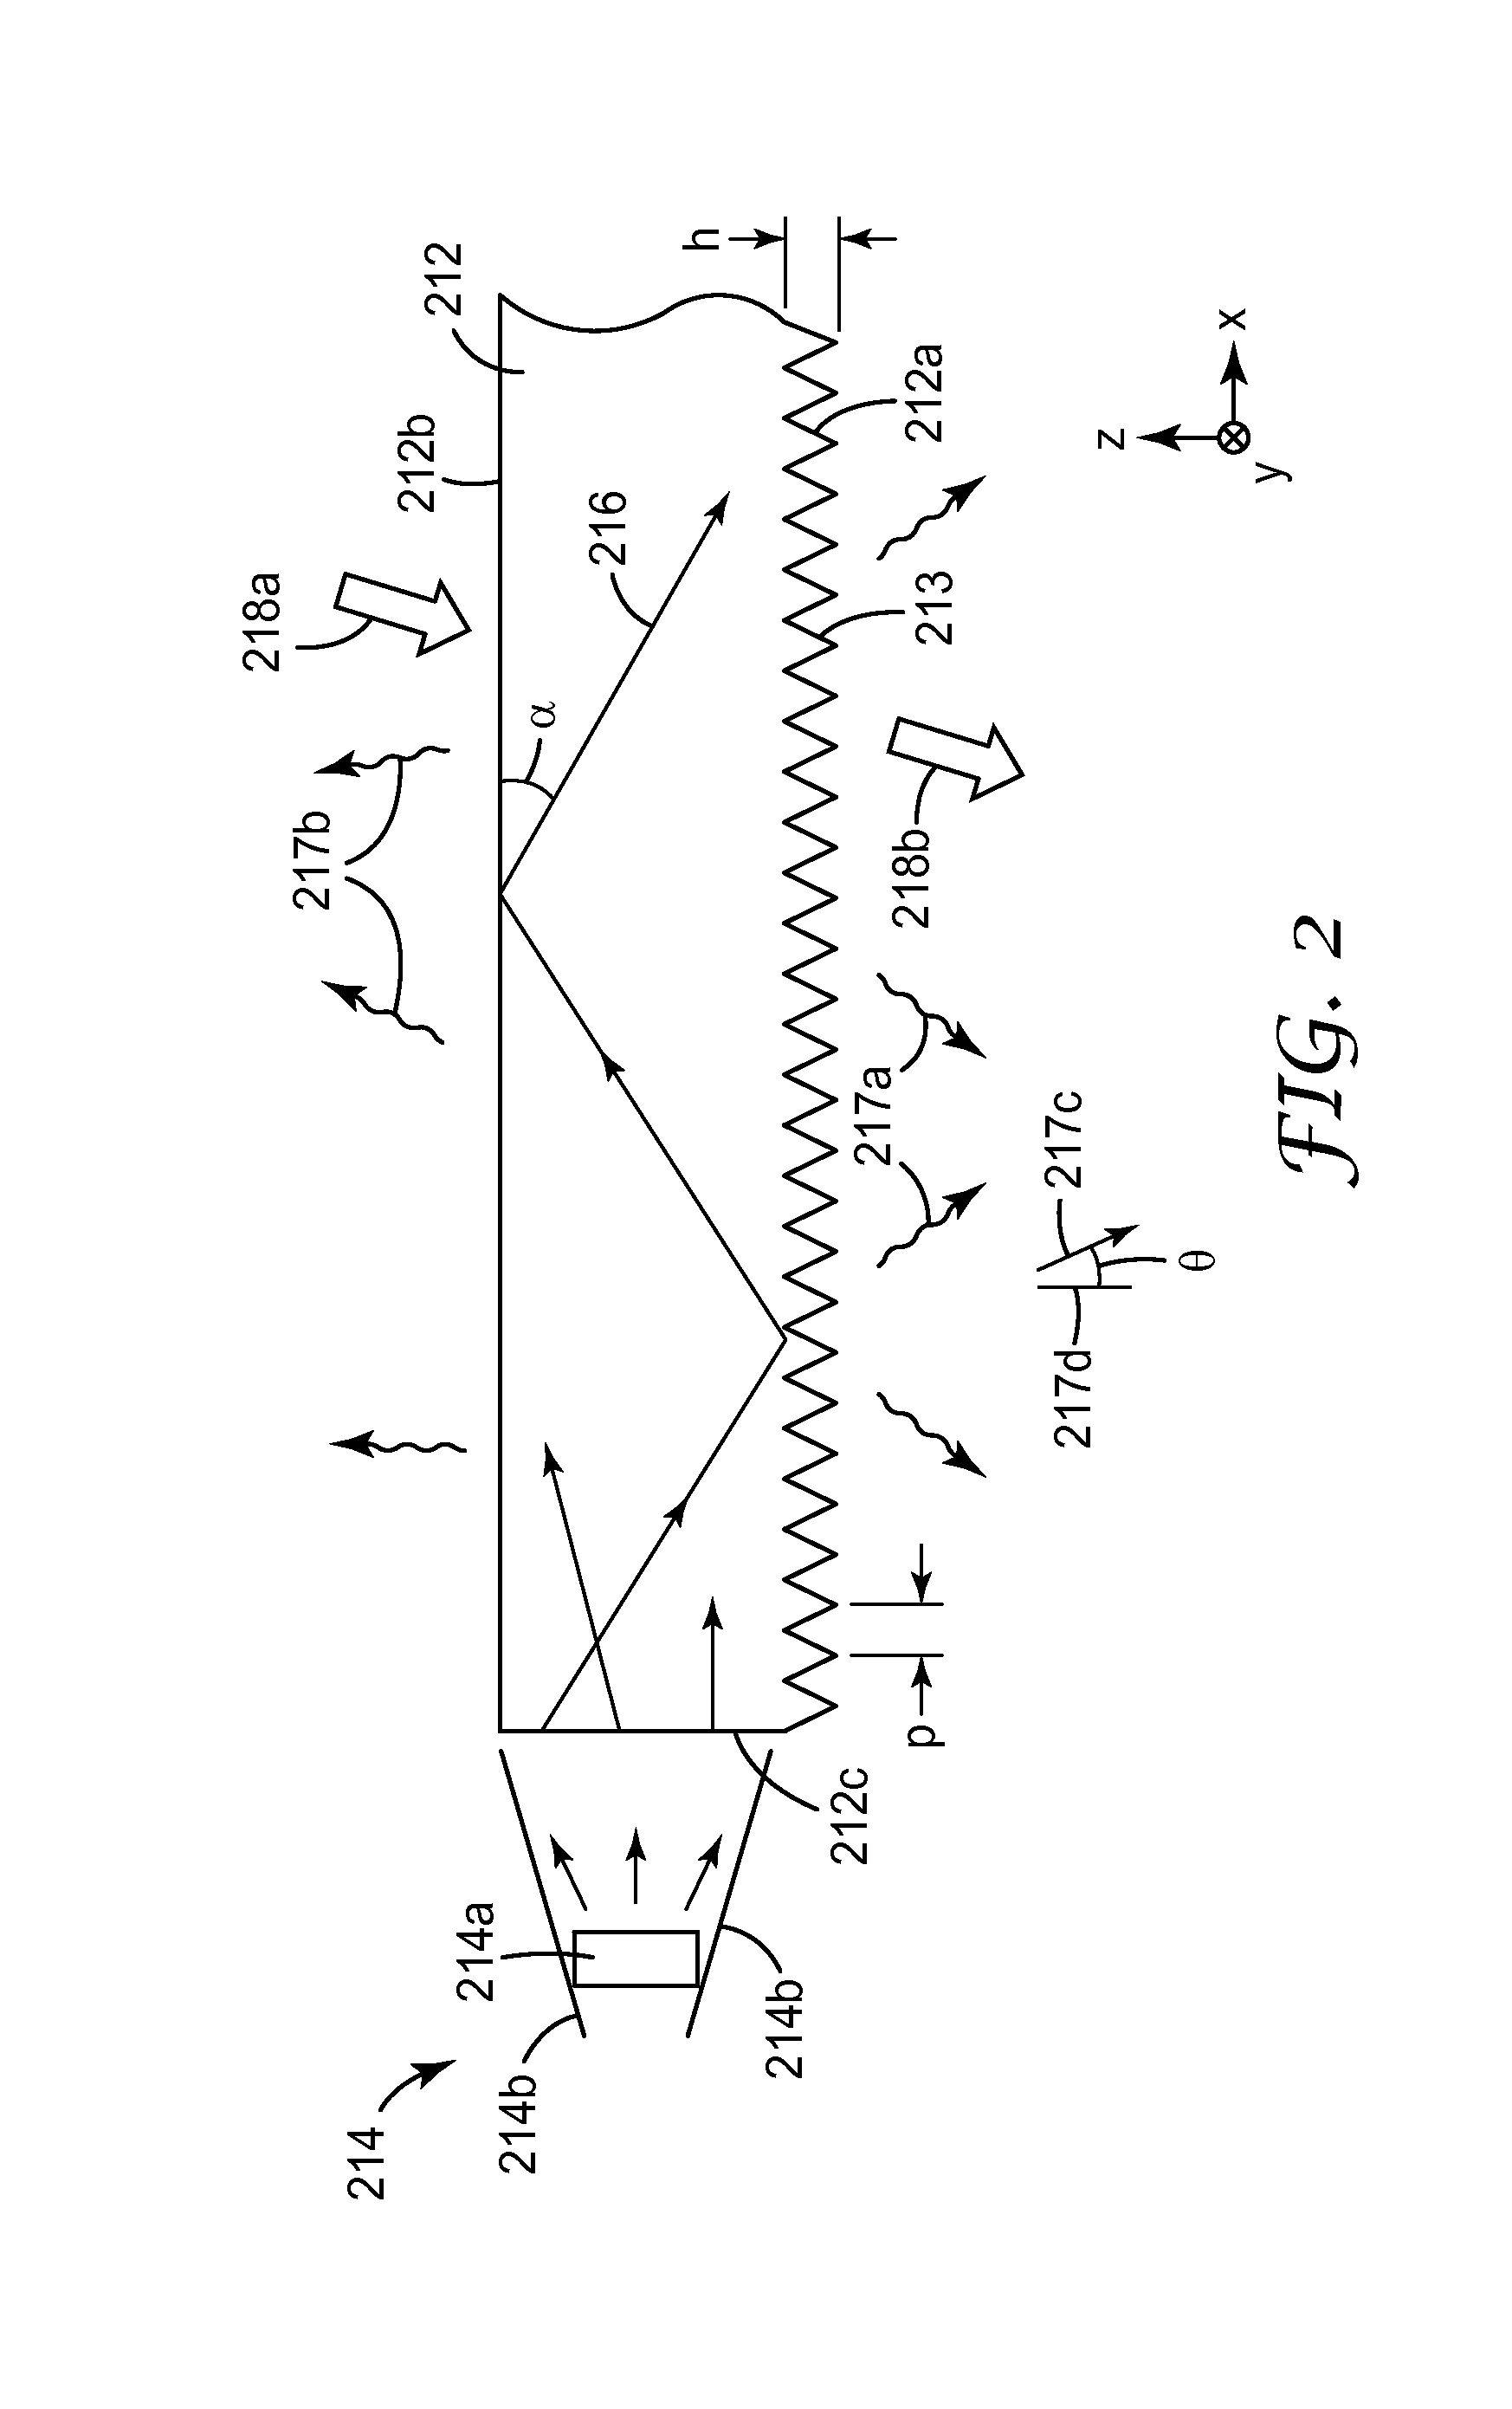 Diffractive lighting devices with 3-dimensional appearance